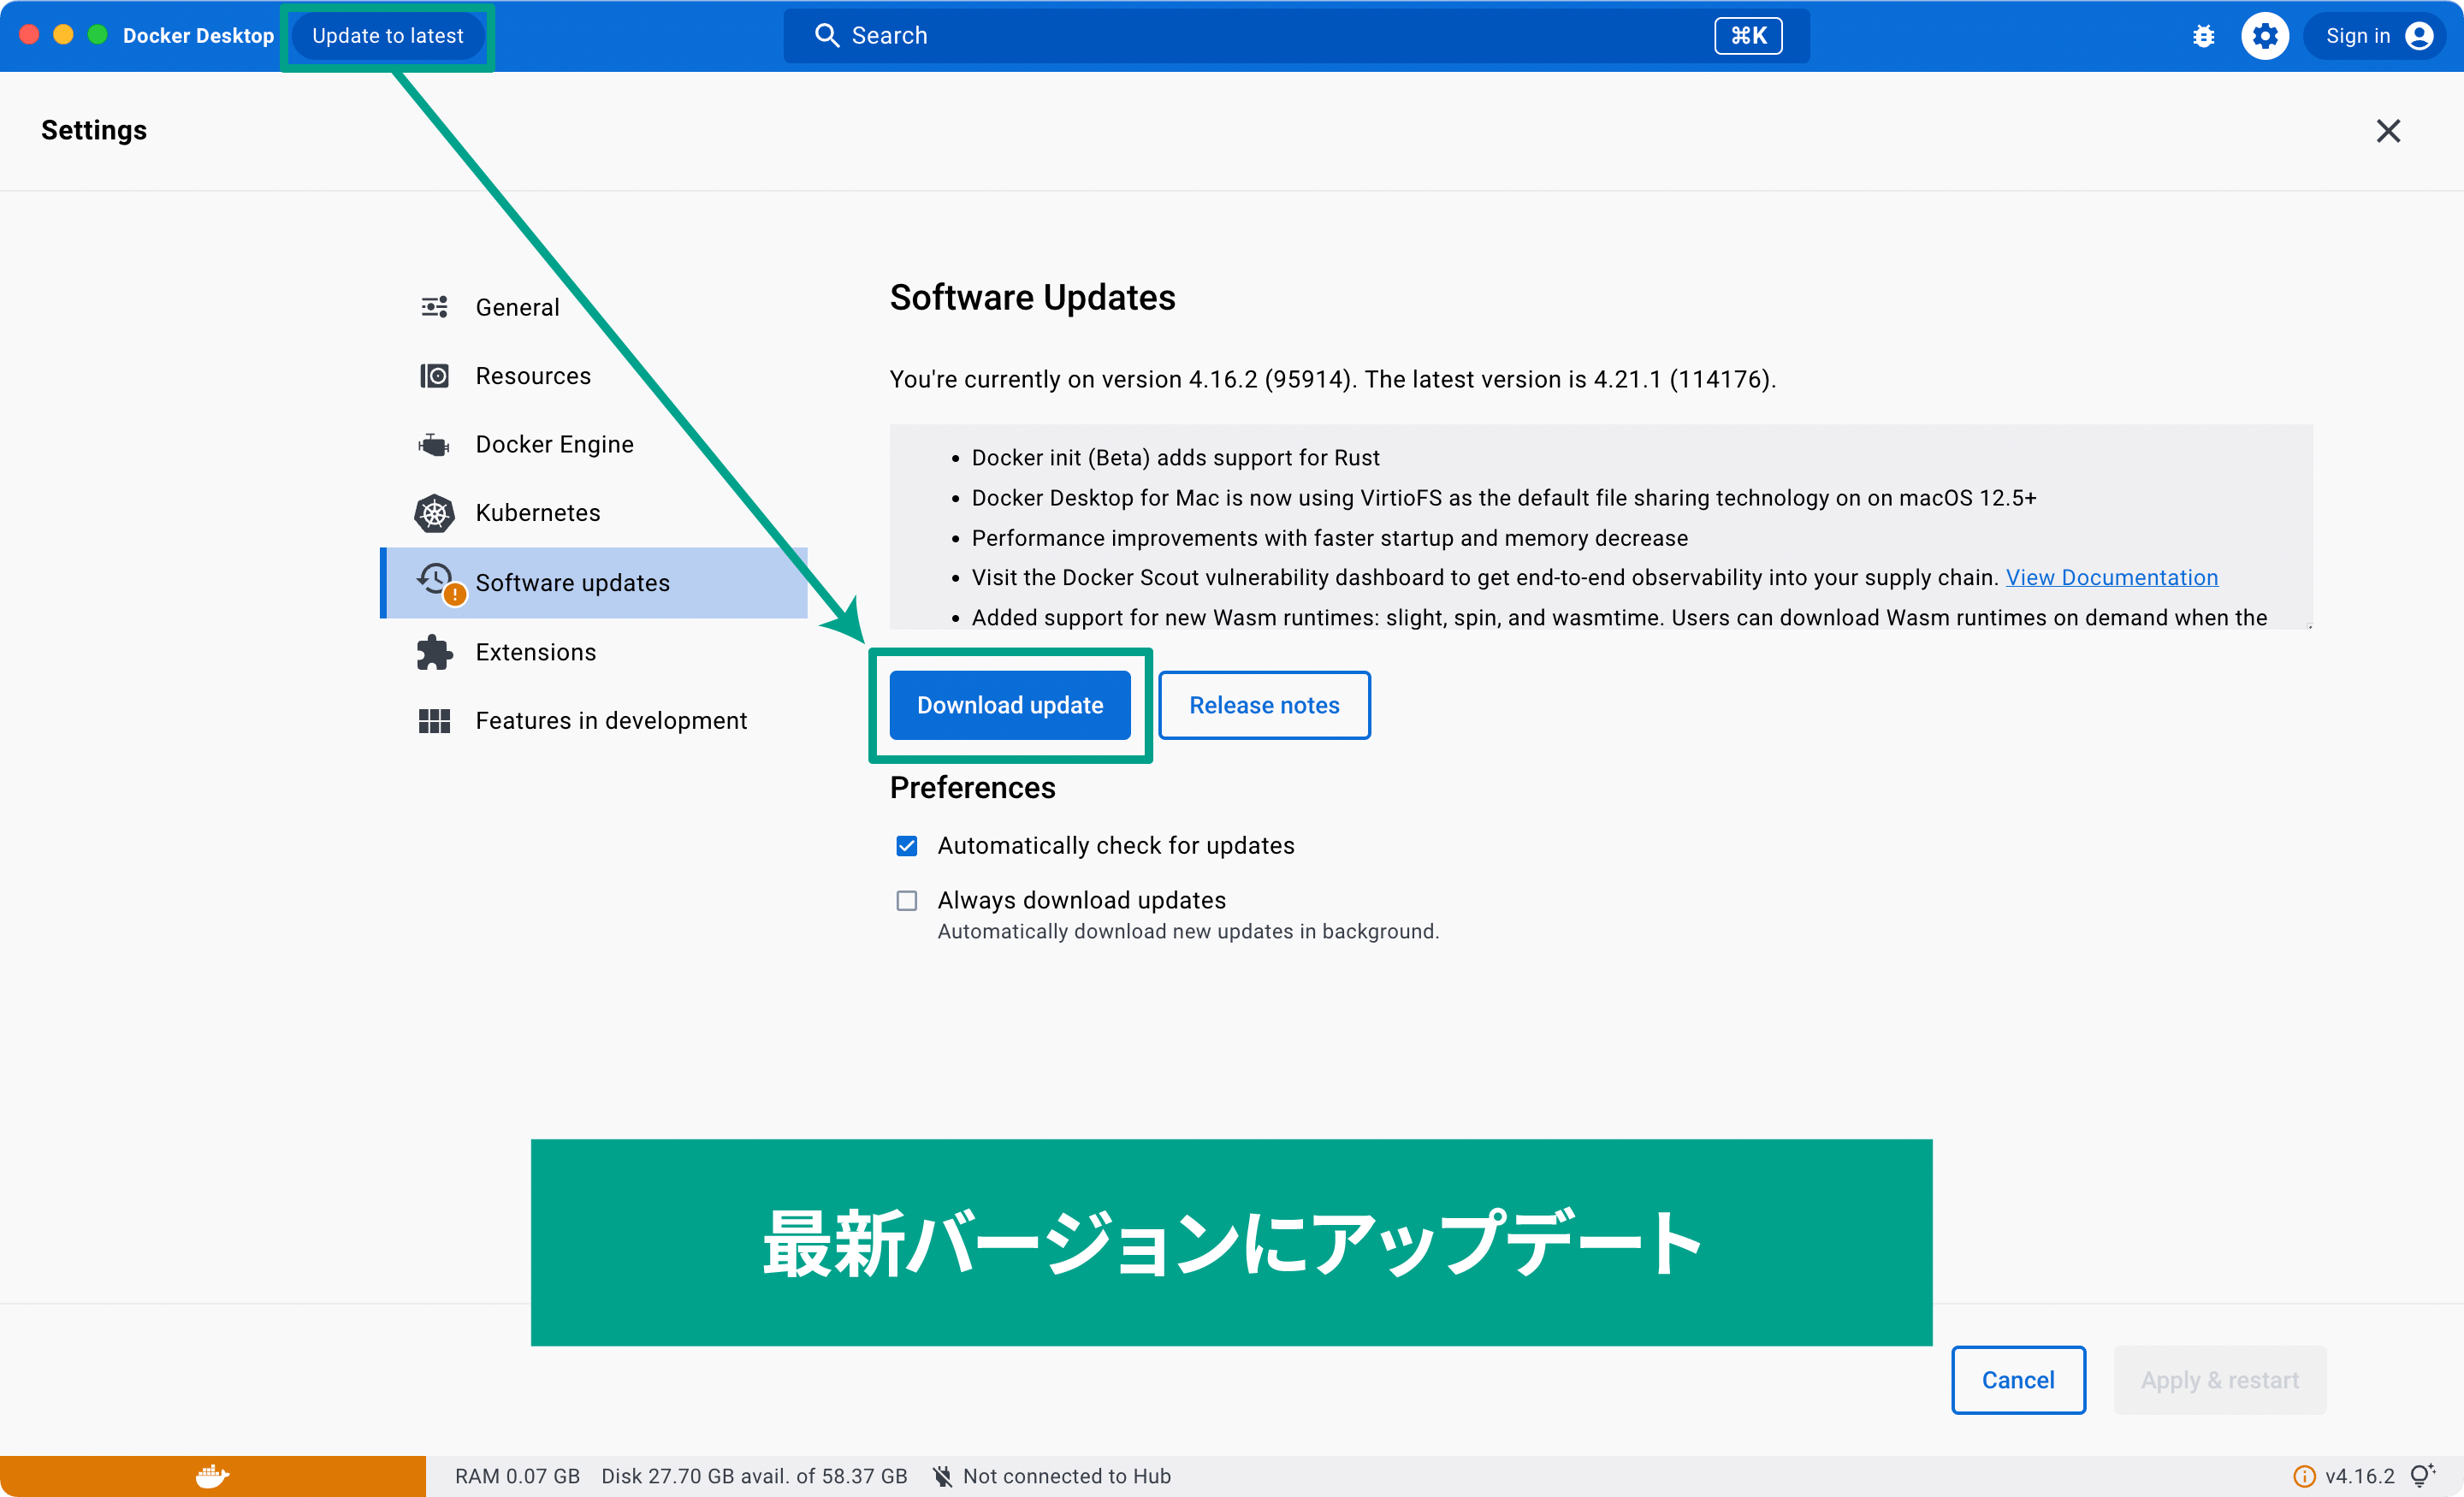 ［Settings］→［Software updates］の画面。「You're currently on version ○.○○.○」と、自身のバージョンを確認できる。